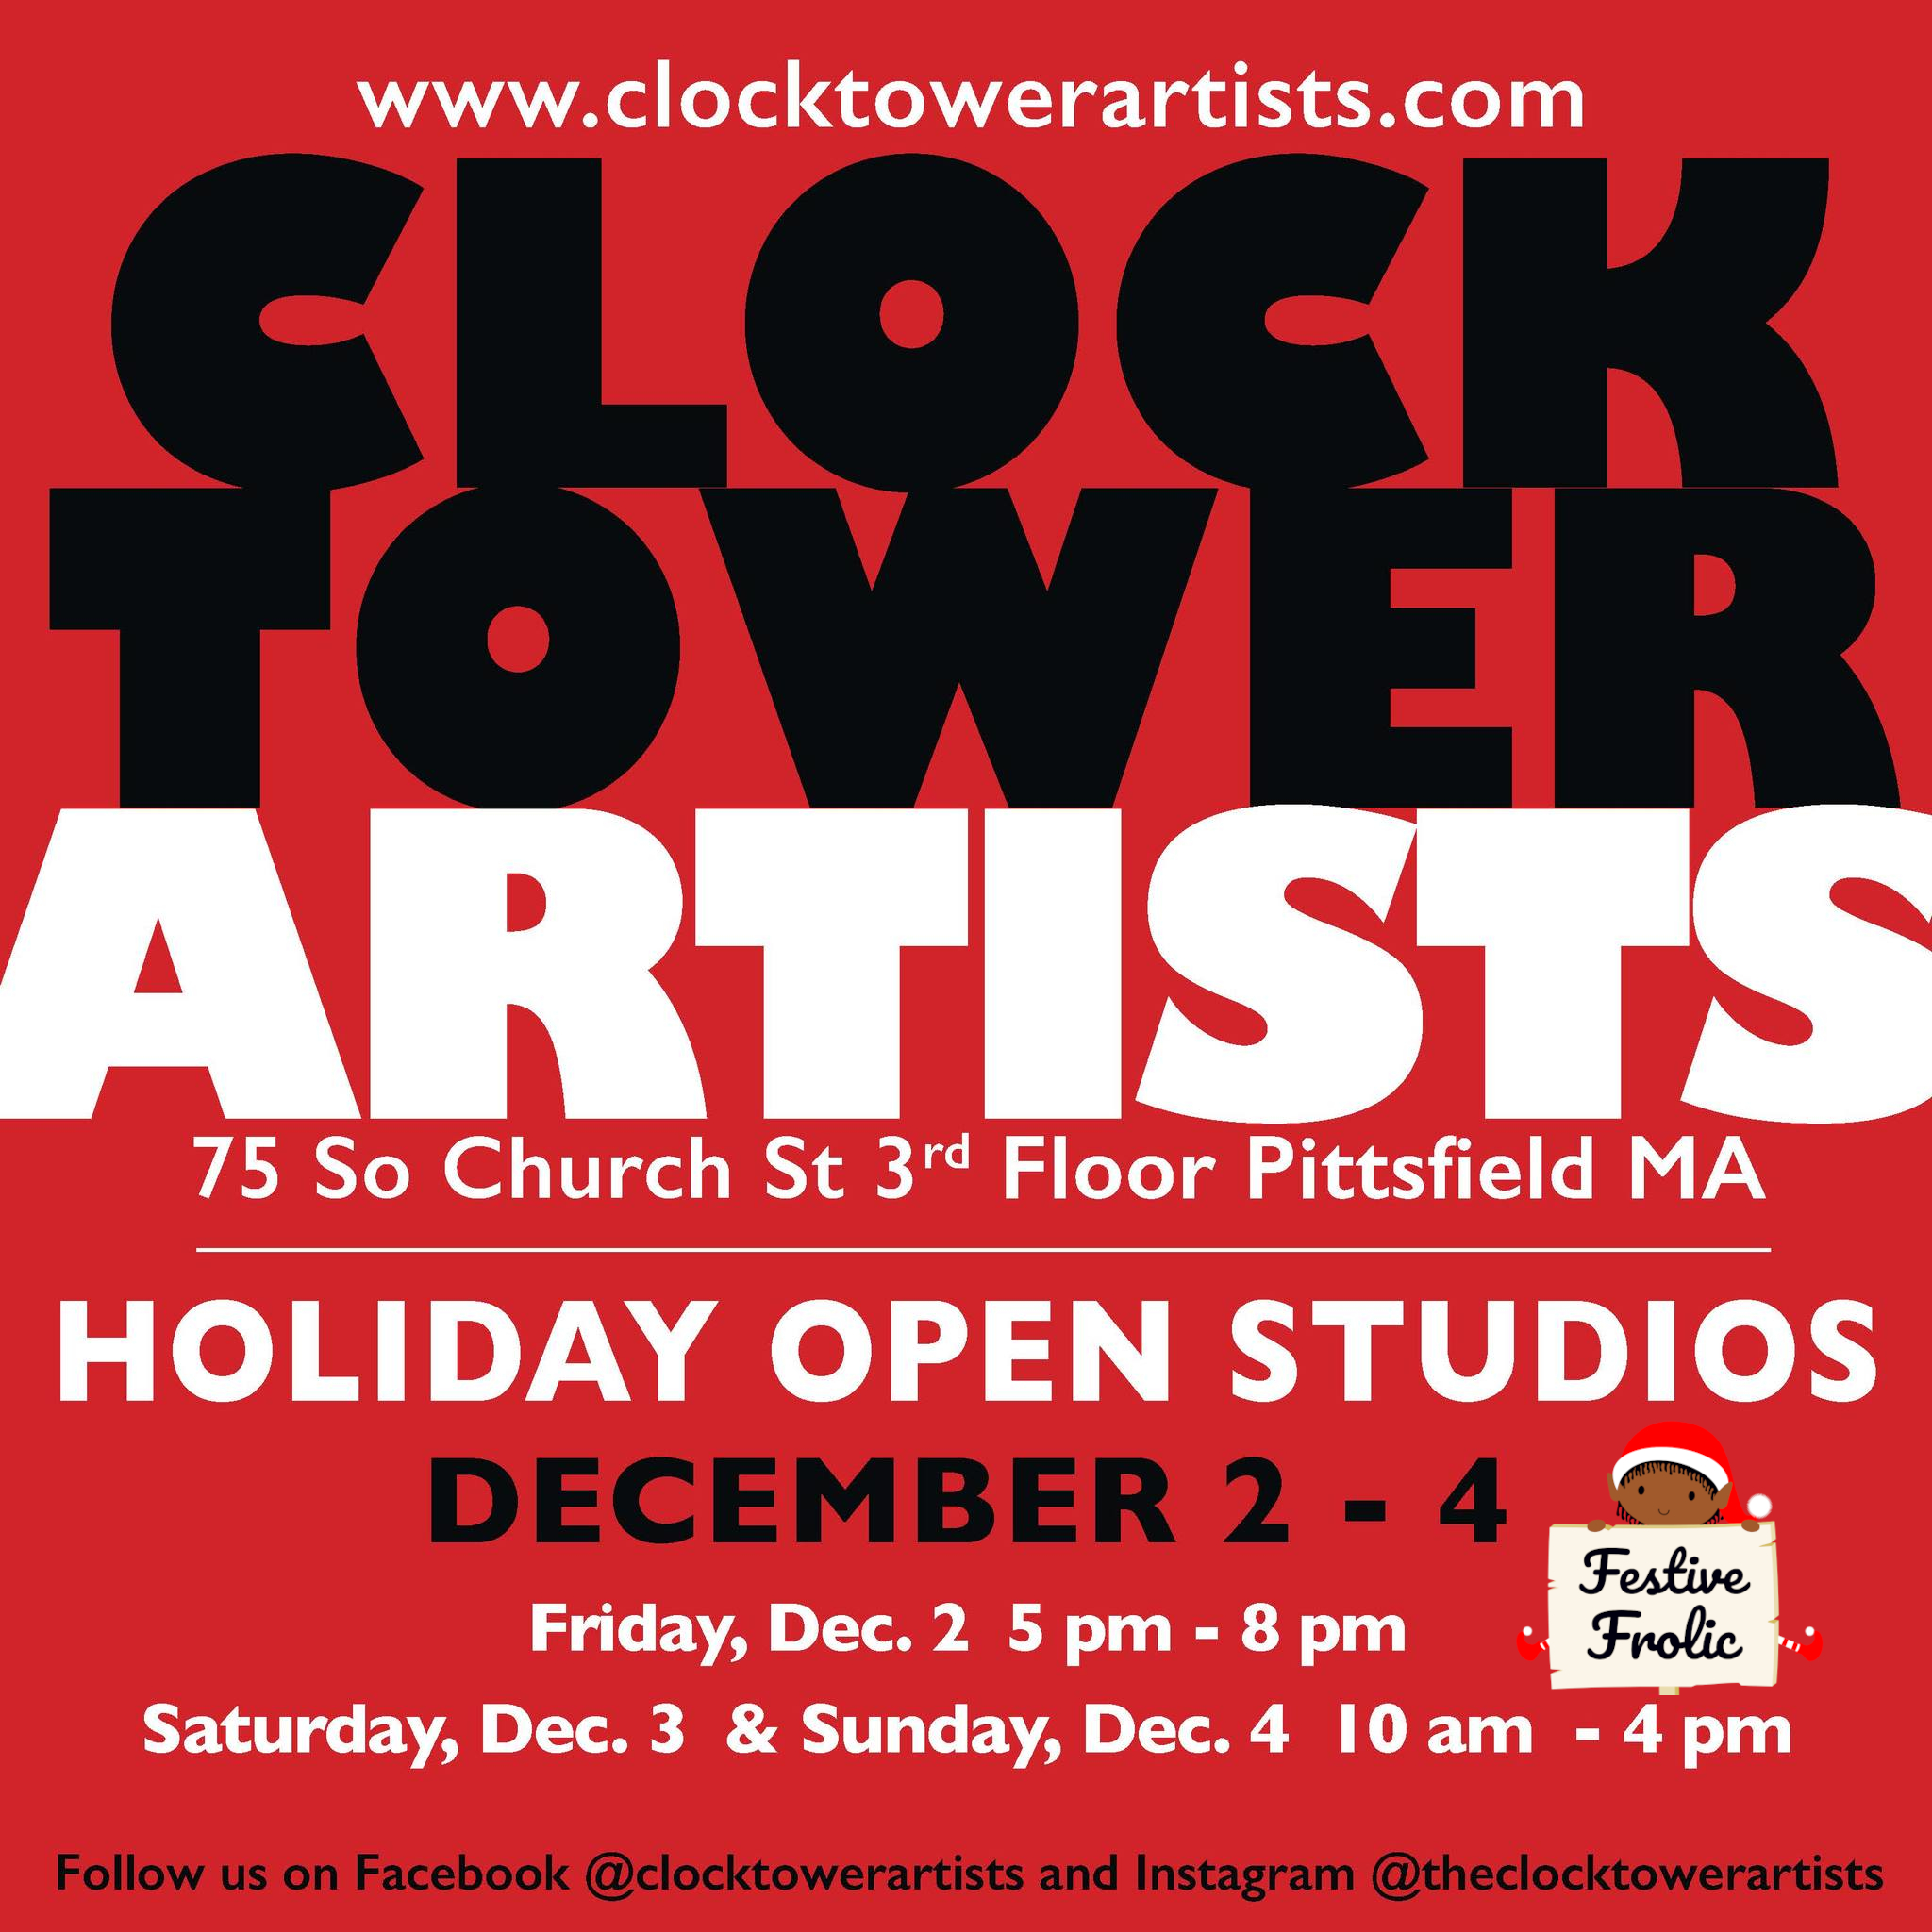 Holiday Open Studios at the Clock Tower